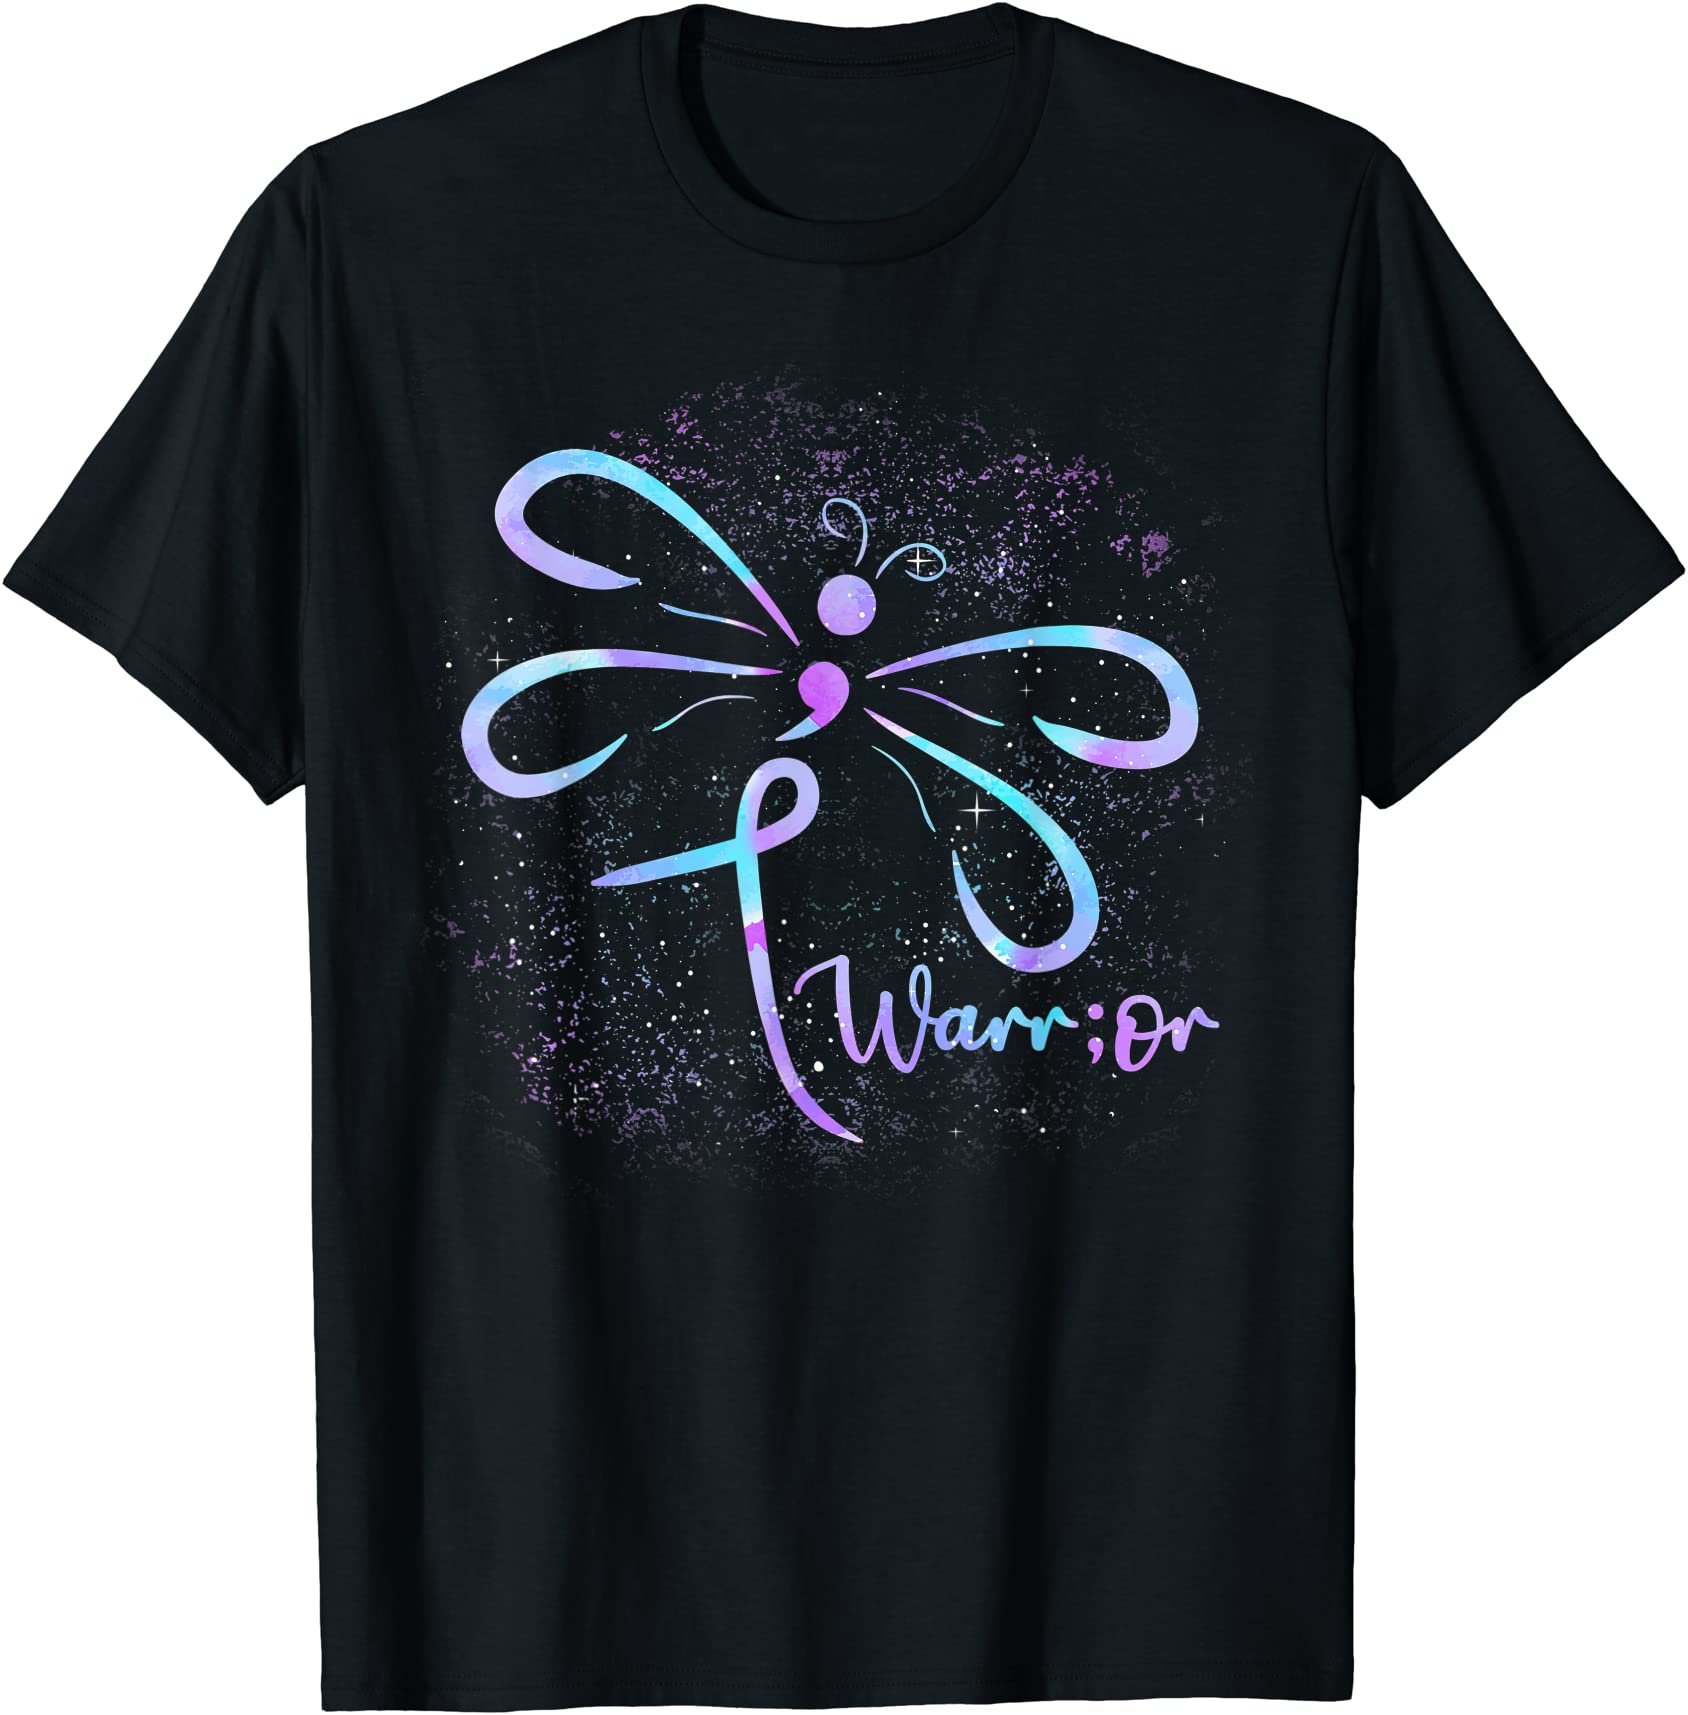 suicide prevention awareness dragonfly semicolon t shirt men - Buy t ...